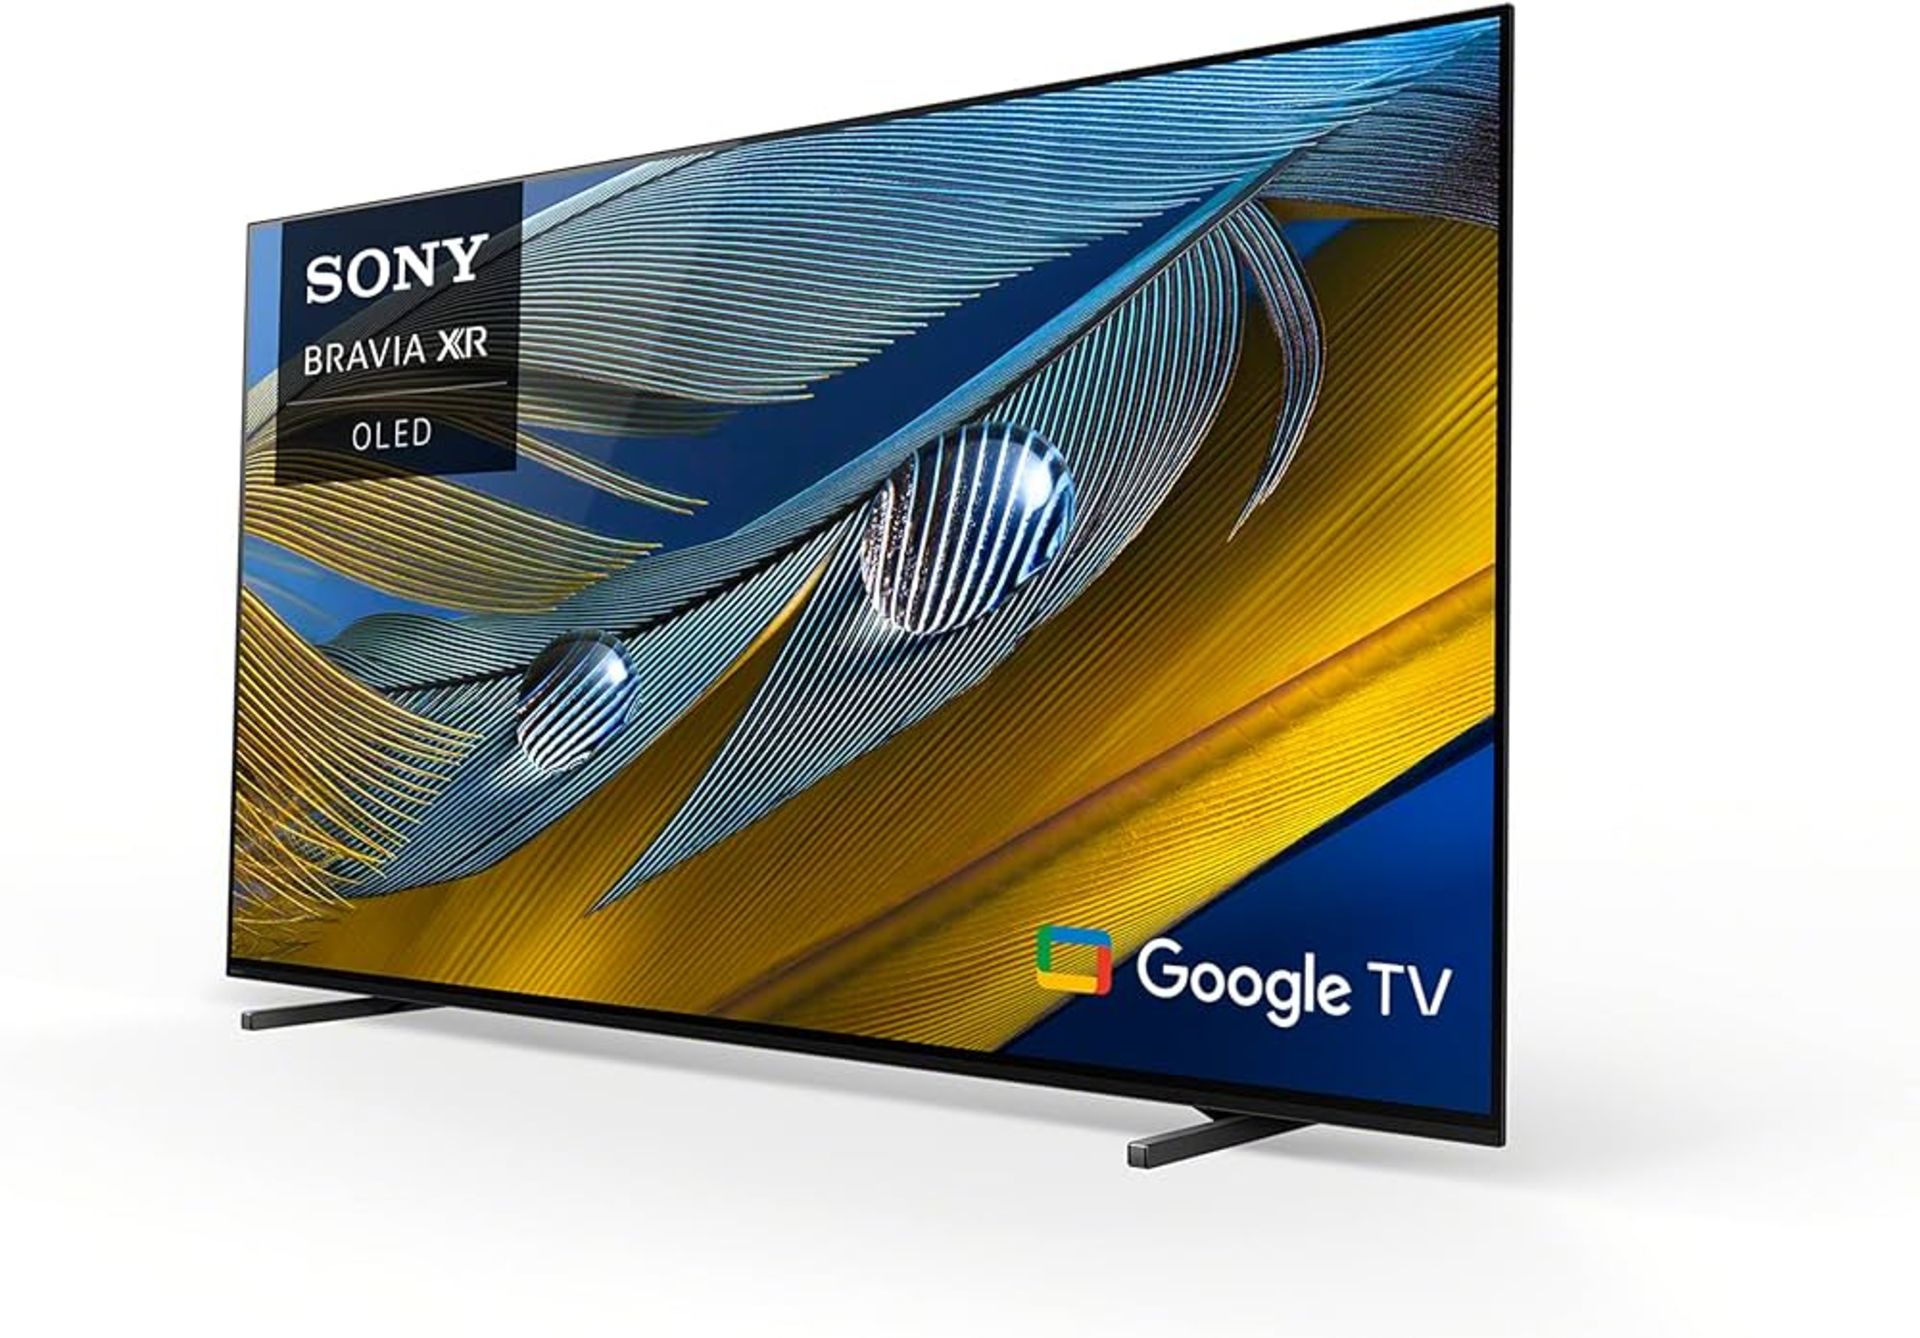 1 BOXED SONY BRAVIA OLED TV XR-55A80J 55" 4K ULTRA HD (3840X2160) GOOGLE TV WITH REMOTE RRP Â£